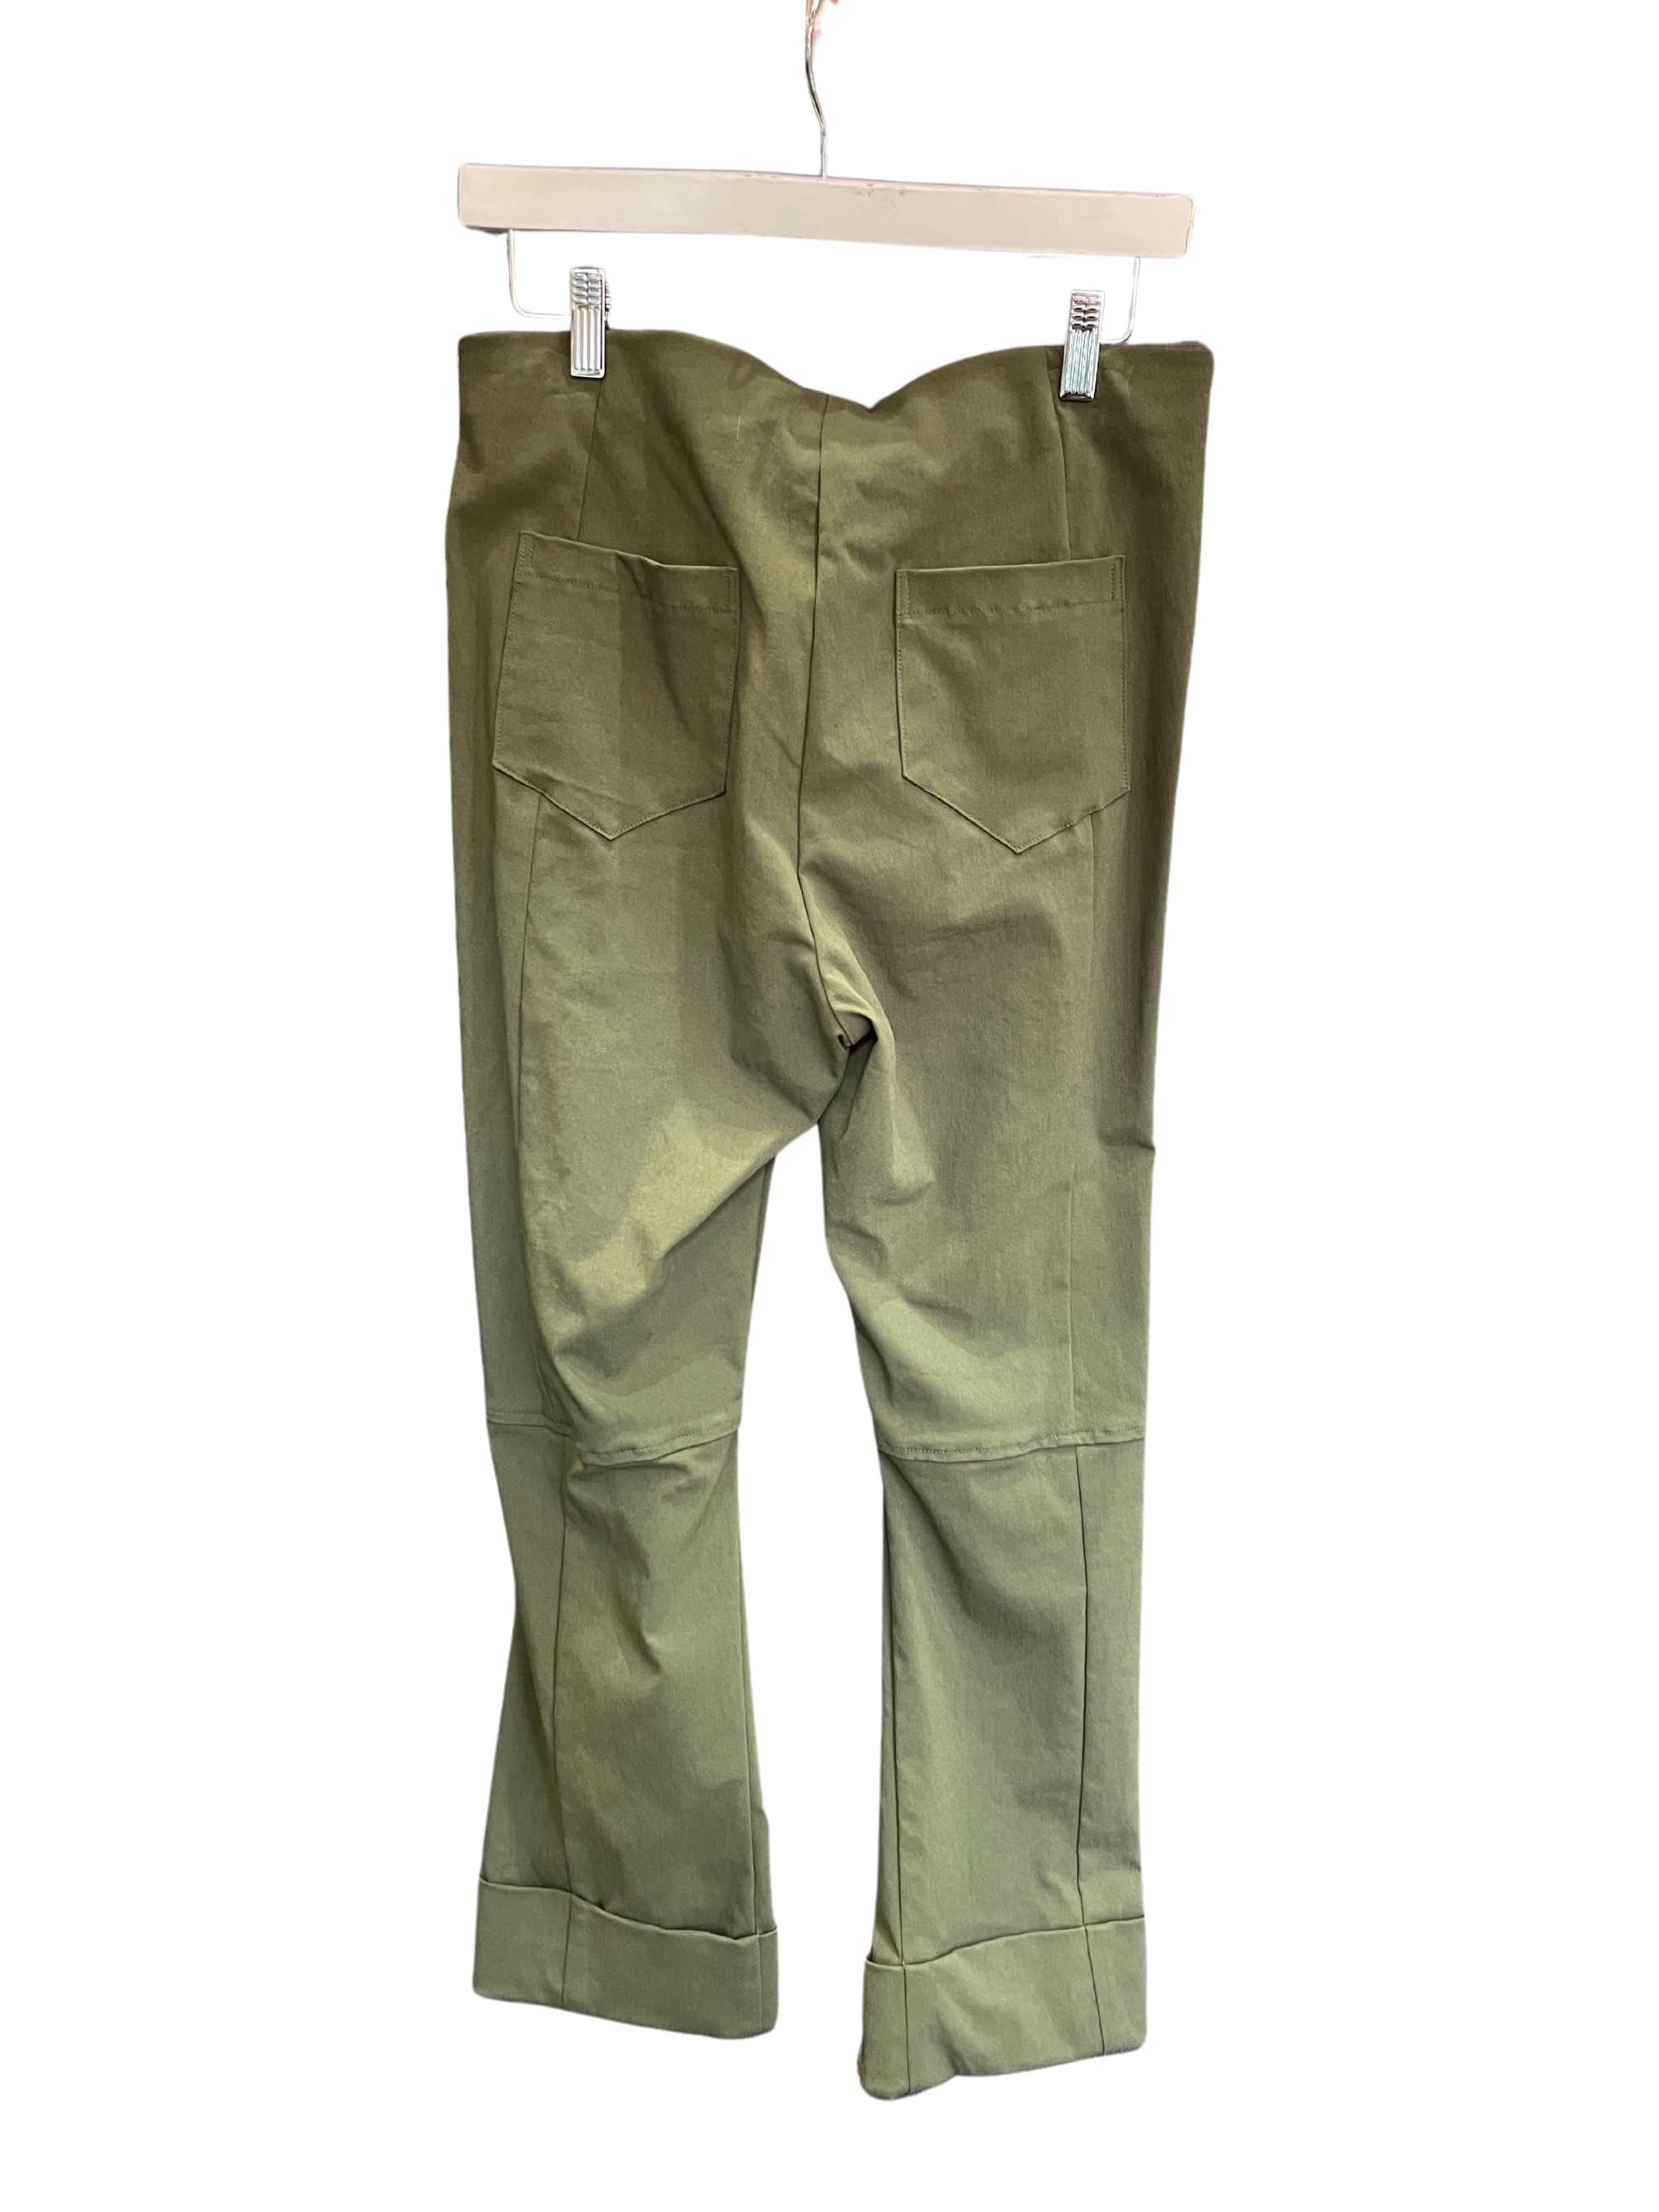 Porto Structured Pant in Olive Green 